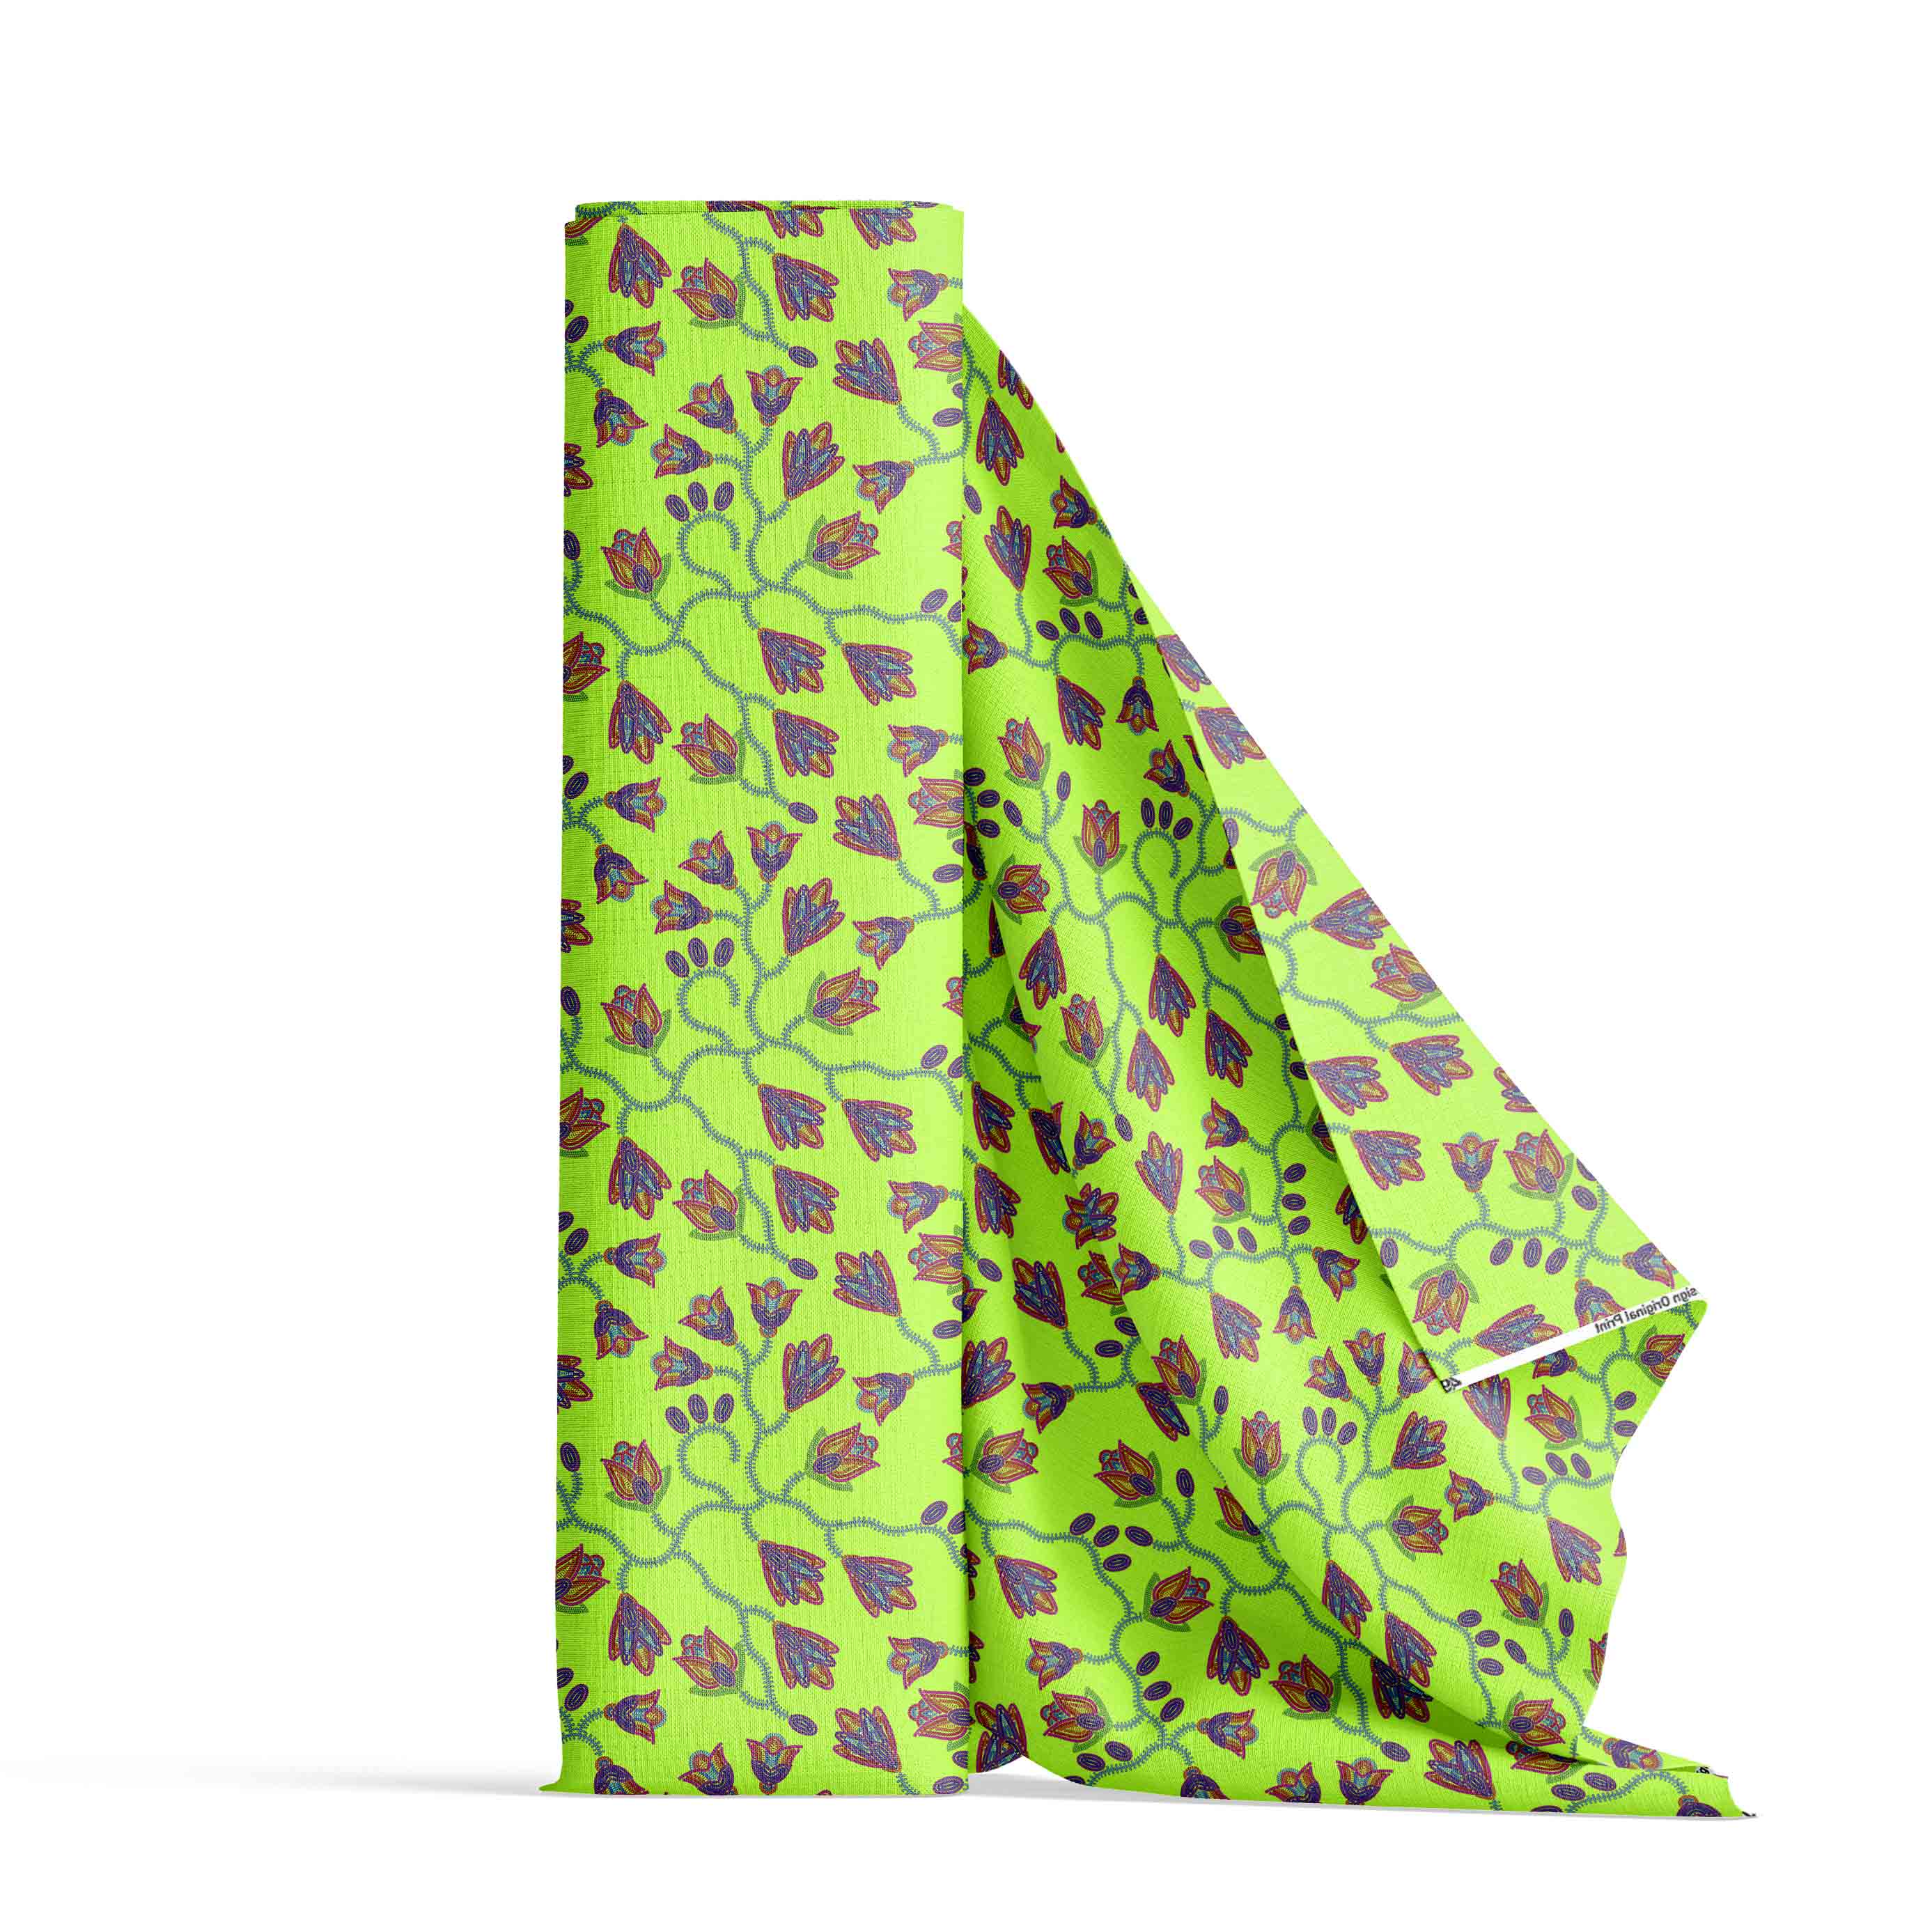 Spring Blossoms Neon Green Cotton Poplin Fabric By the Yard